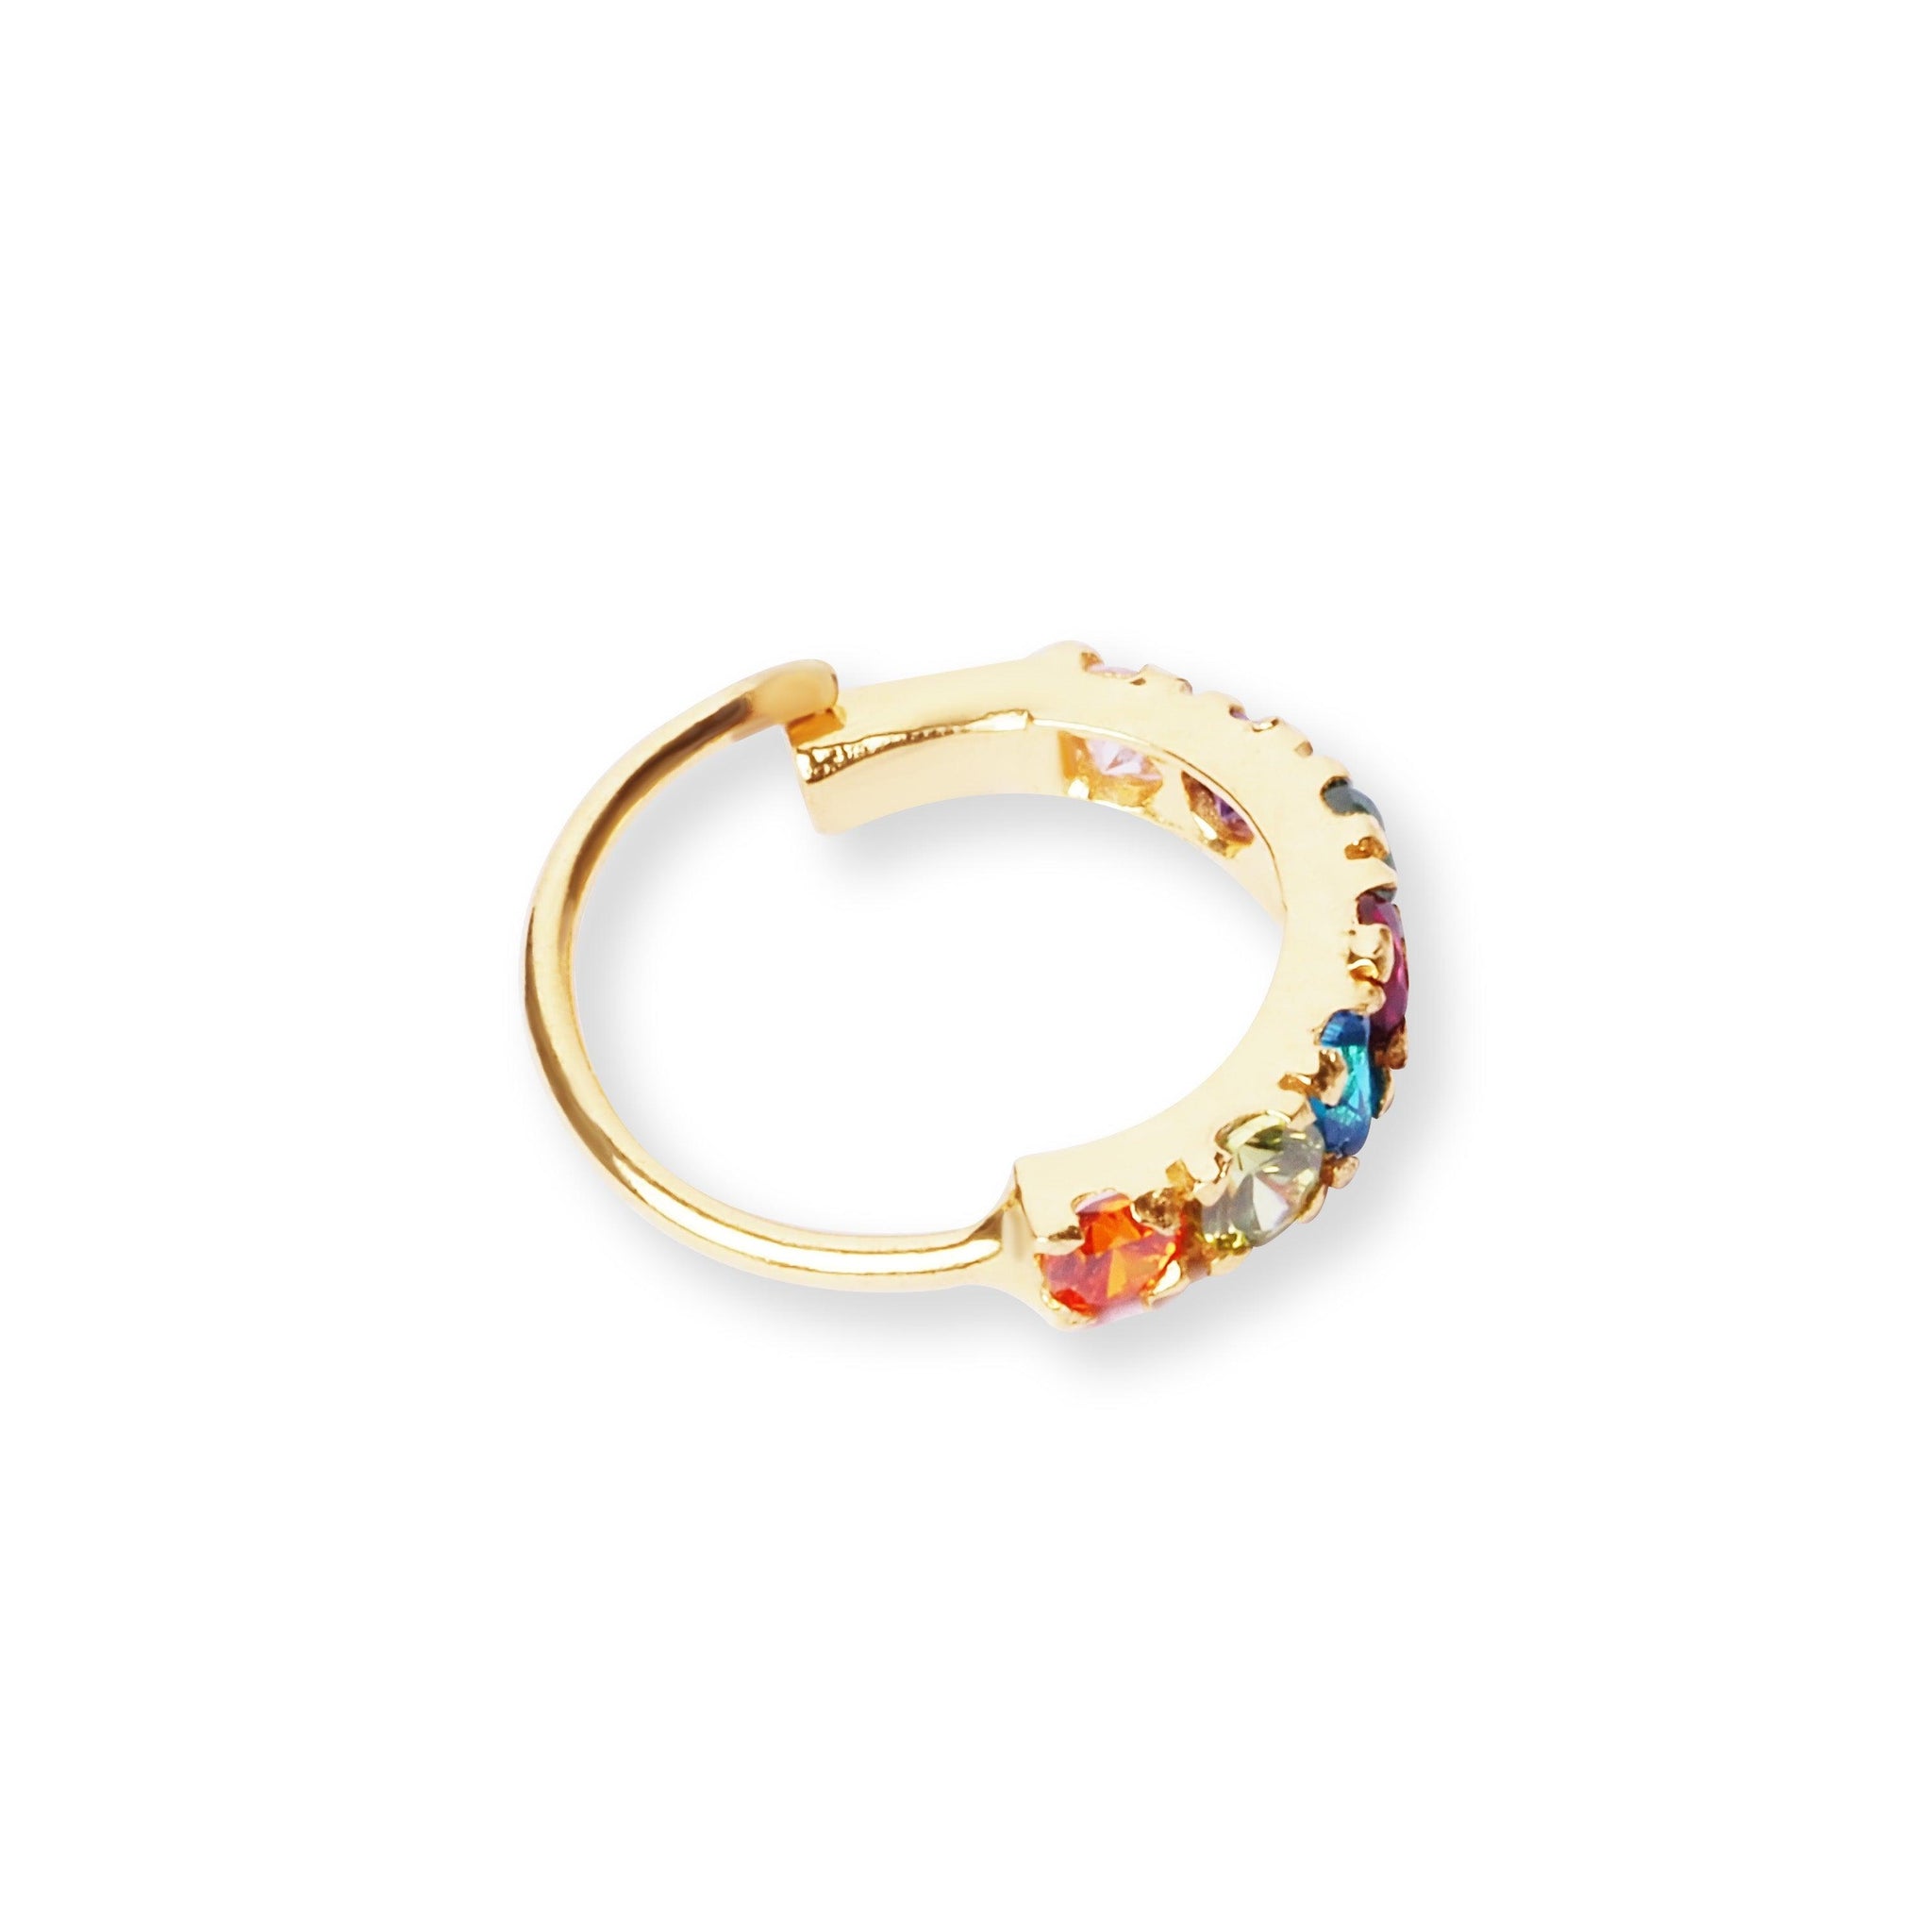 18ct Yellow Gold Nose Ring with Multi-Coloured Cubic Zirconias NR-7587